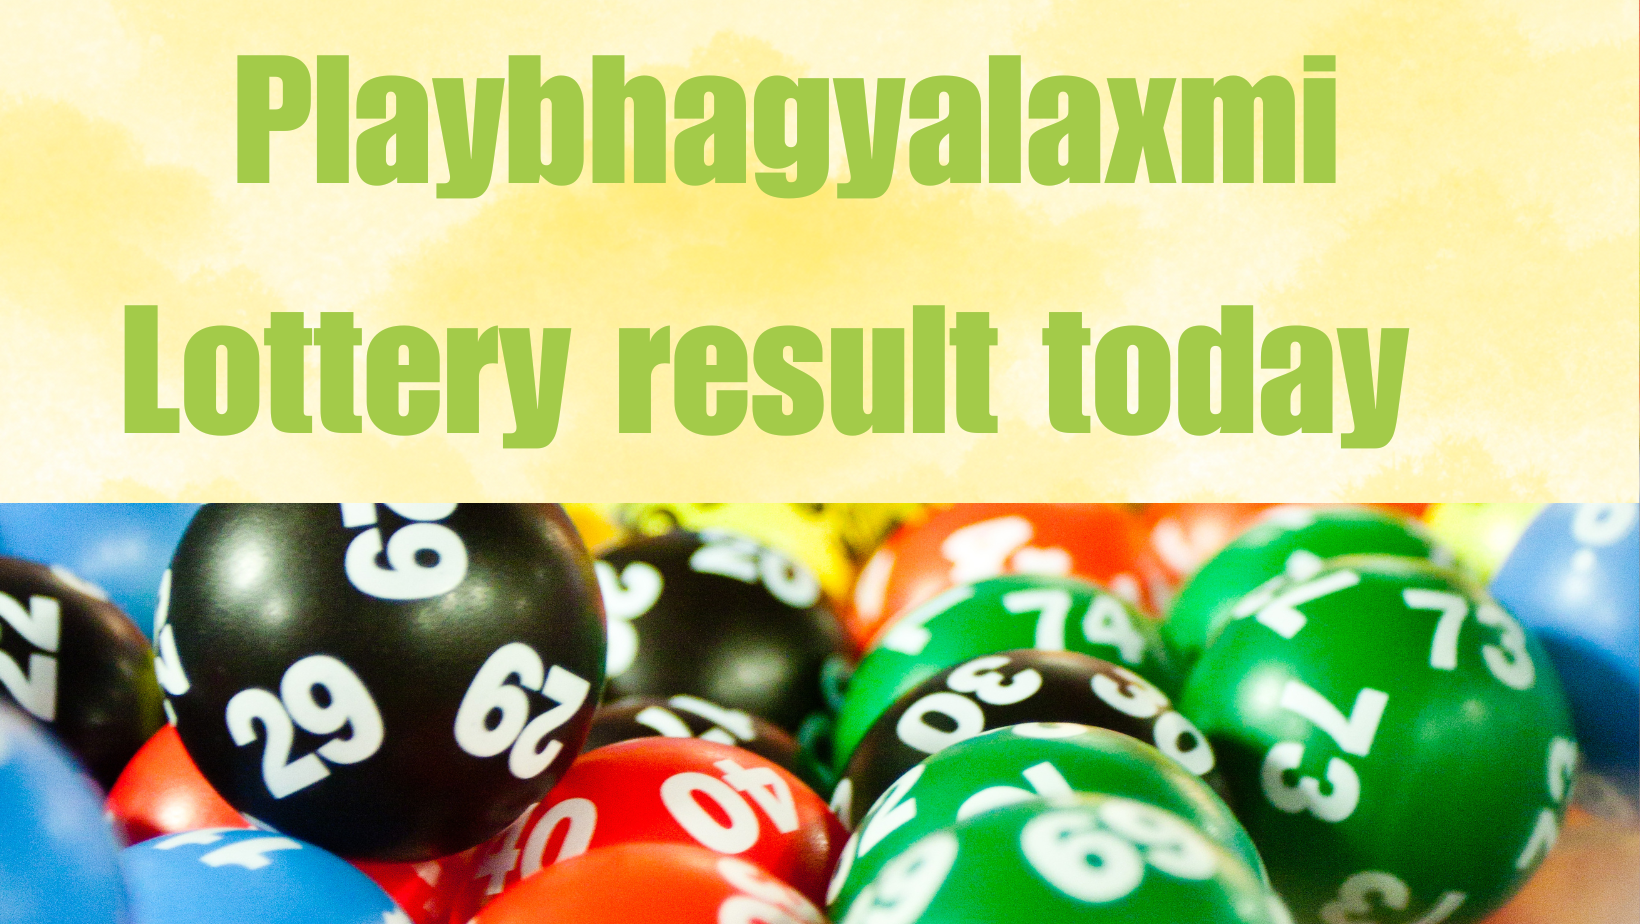 Pink Minimal Aesthetic Business Name Facebook Cover Playbhagyalaxmi Lottery Result 18-05-2024 Live Update